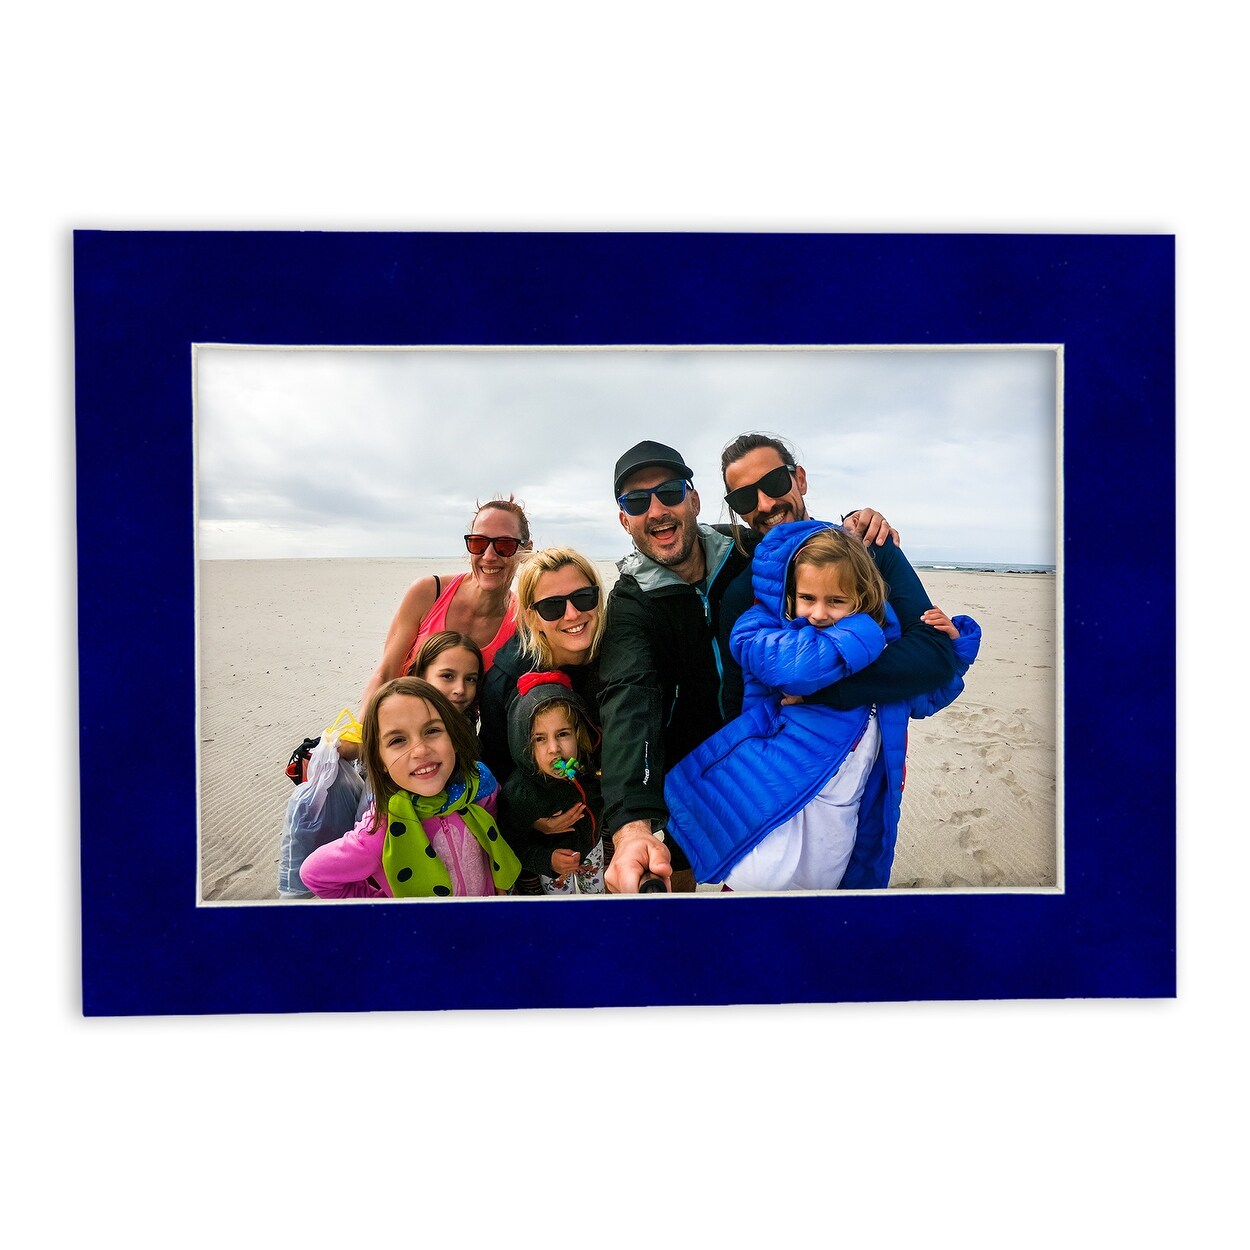  5x7 Mat for 8x10 Frame - Precut Mat Board Acid-Free Navy 5x7  Photo Matte Made to Fit a 8x10 Picture Frame, Premium Matboard for Family  Photos, Show Kits, Art, Picture Framing